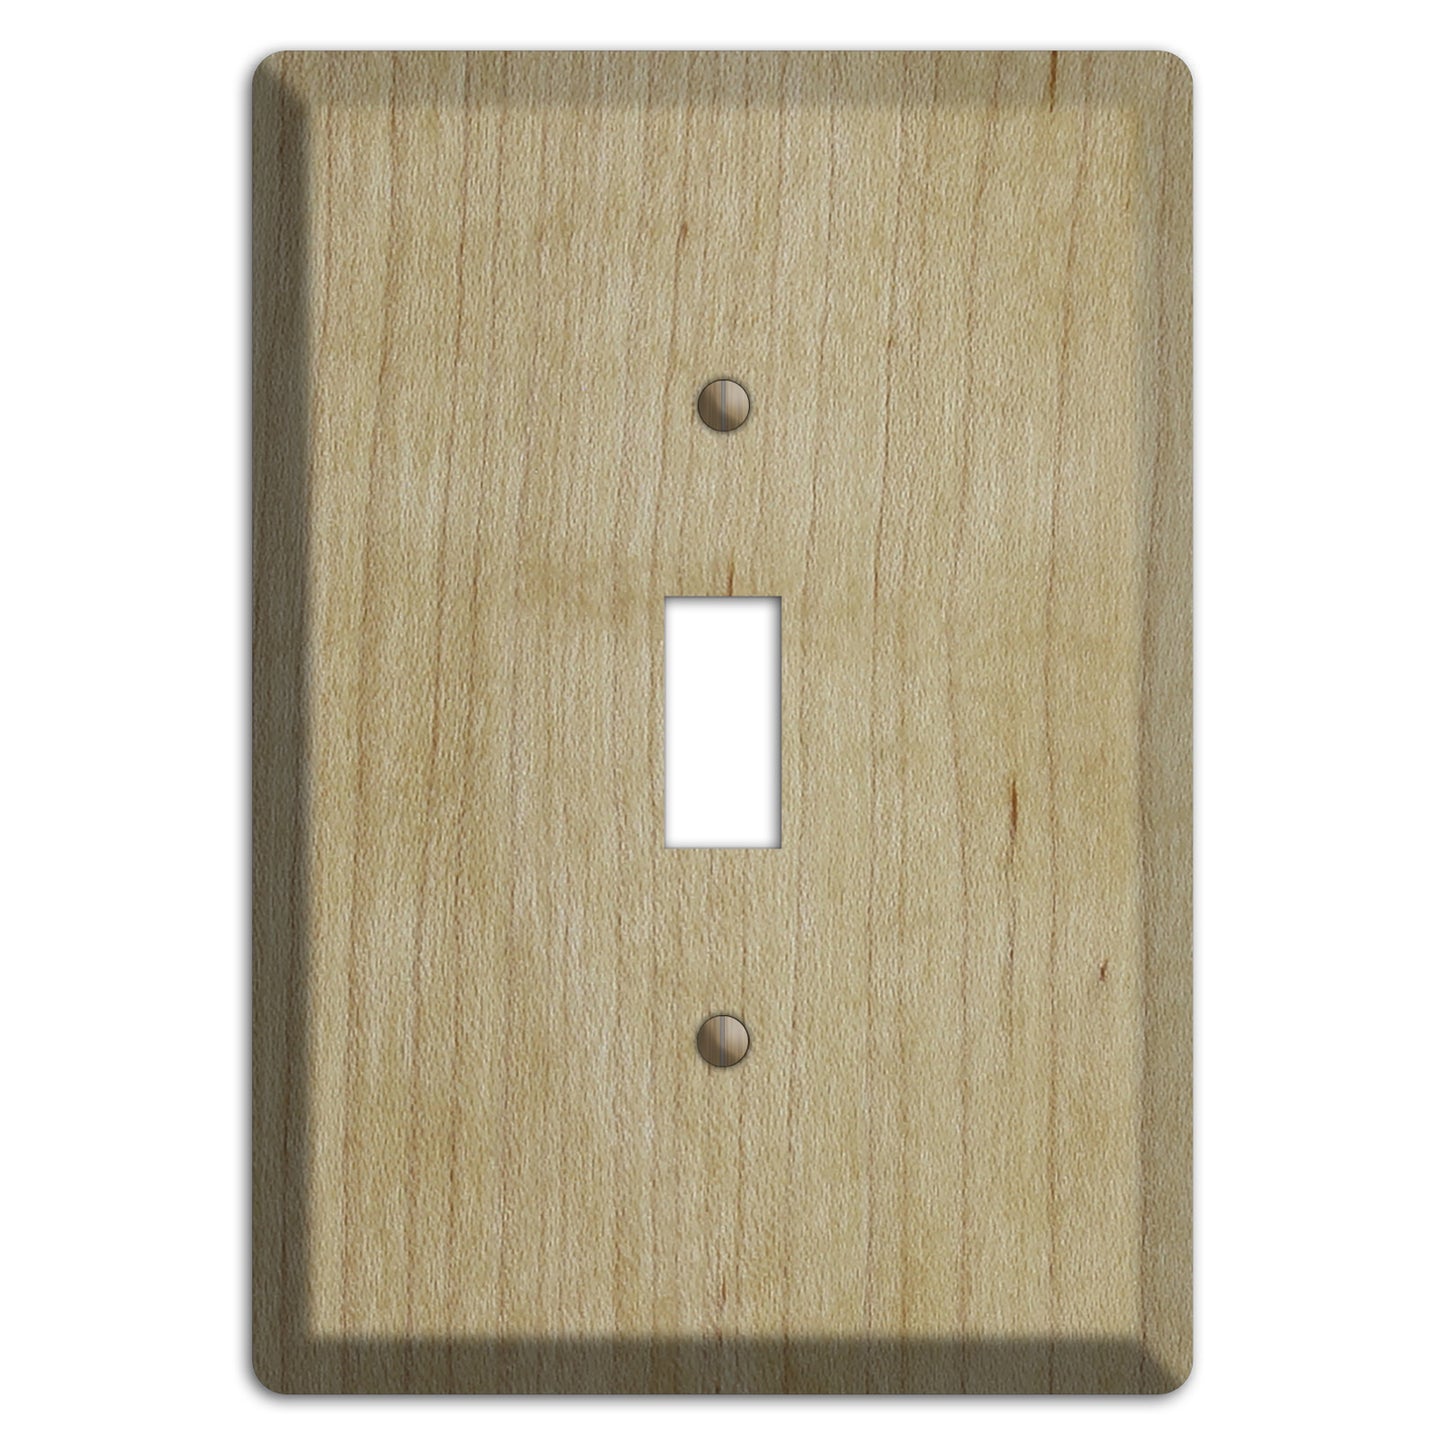 Maple Wood Cover Plates